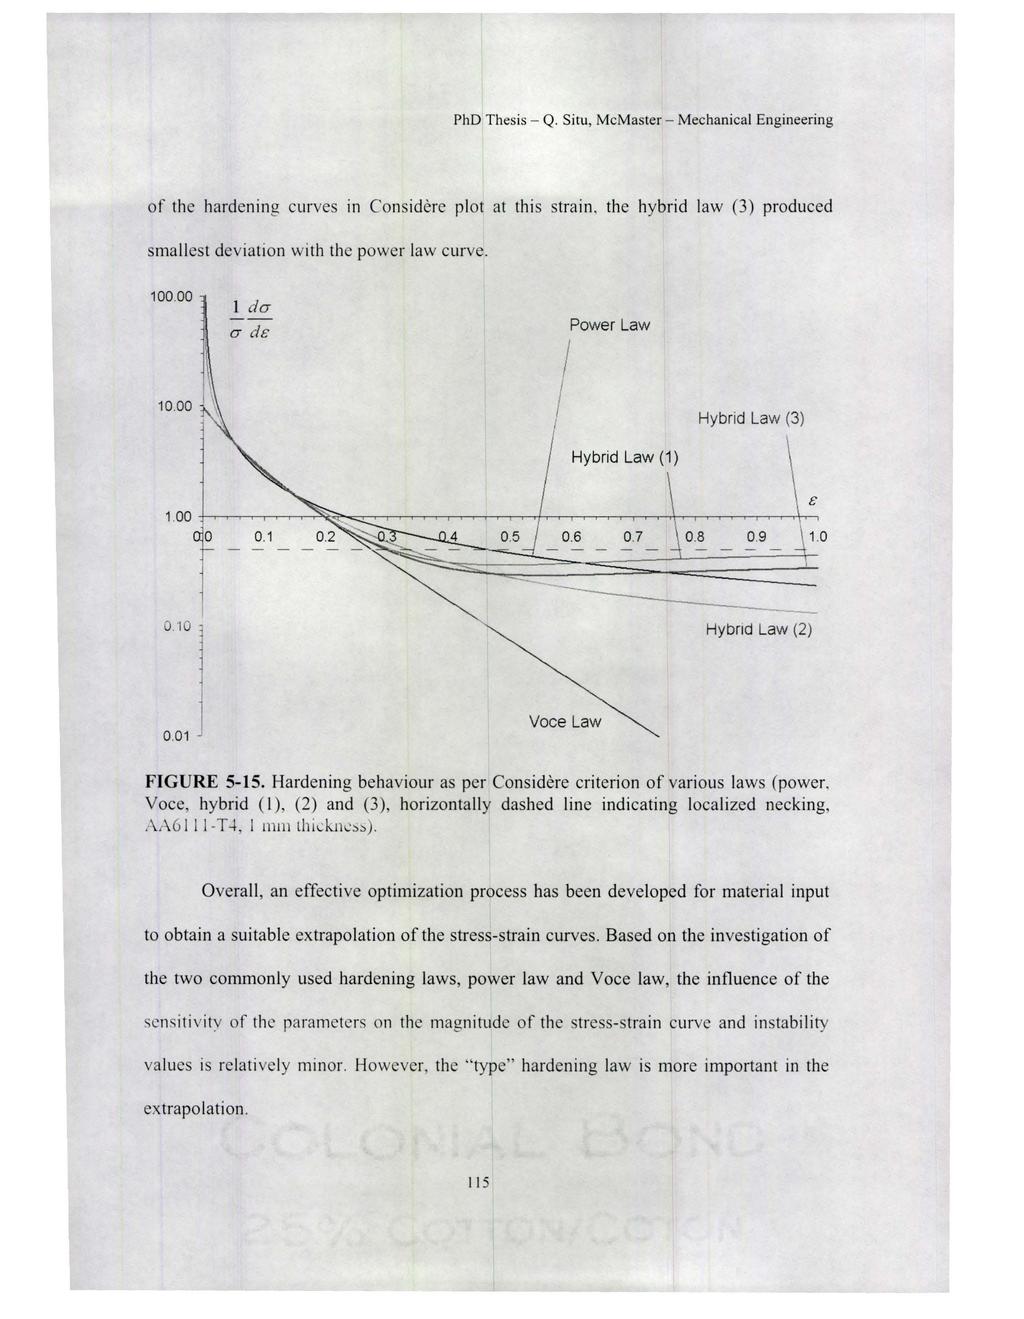 of th e hardening curves in Considere plot at this strain, the hybrid law (3) produced smallest deviation with the power law curve. 100.00 1 drr CY de Power Law Hybrid Law (3) Hybrid Law ( 1) 0.8 0.